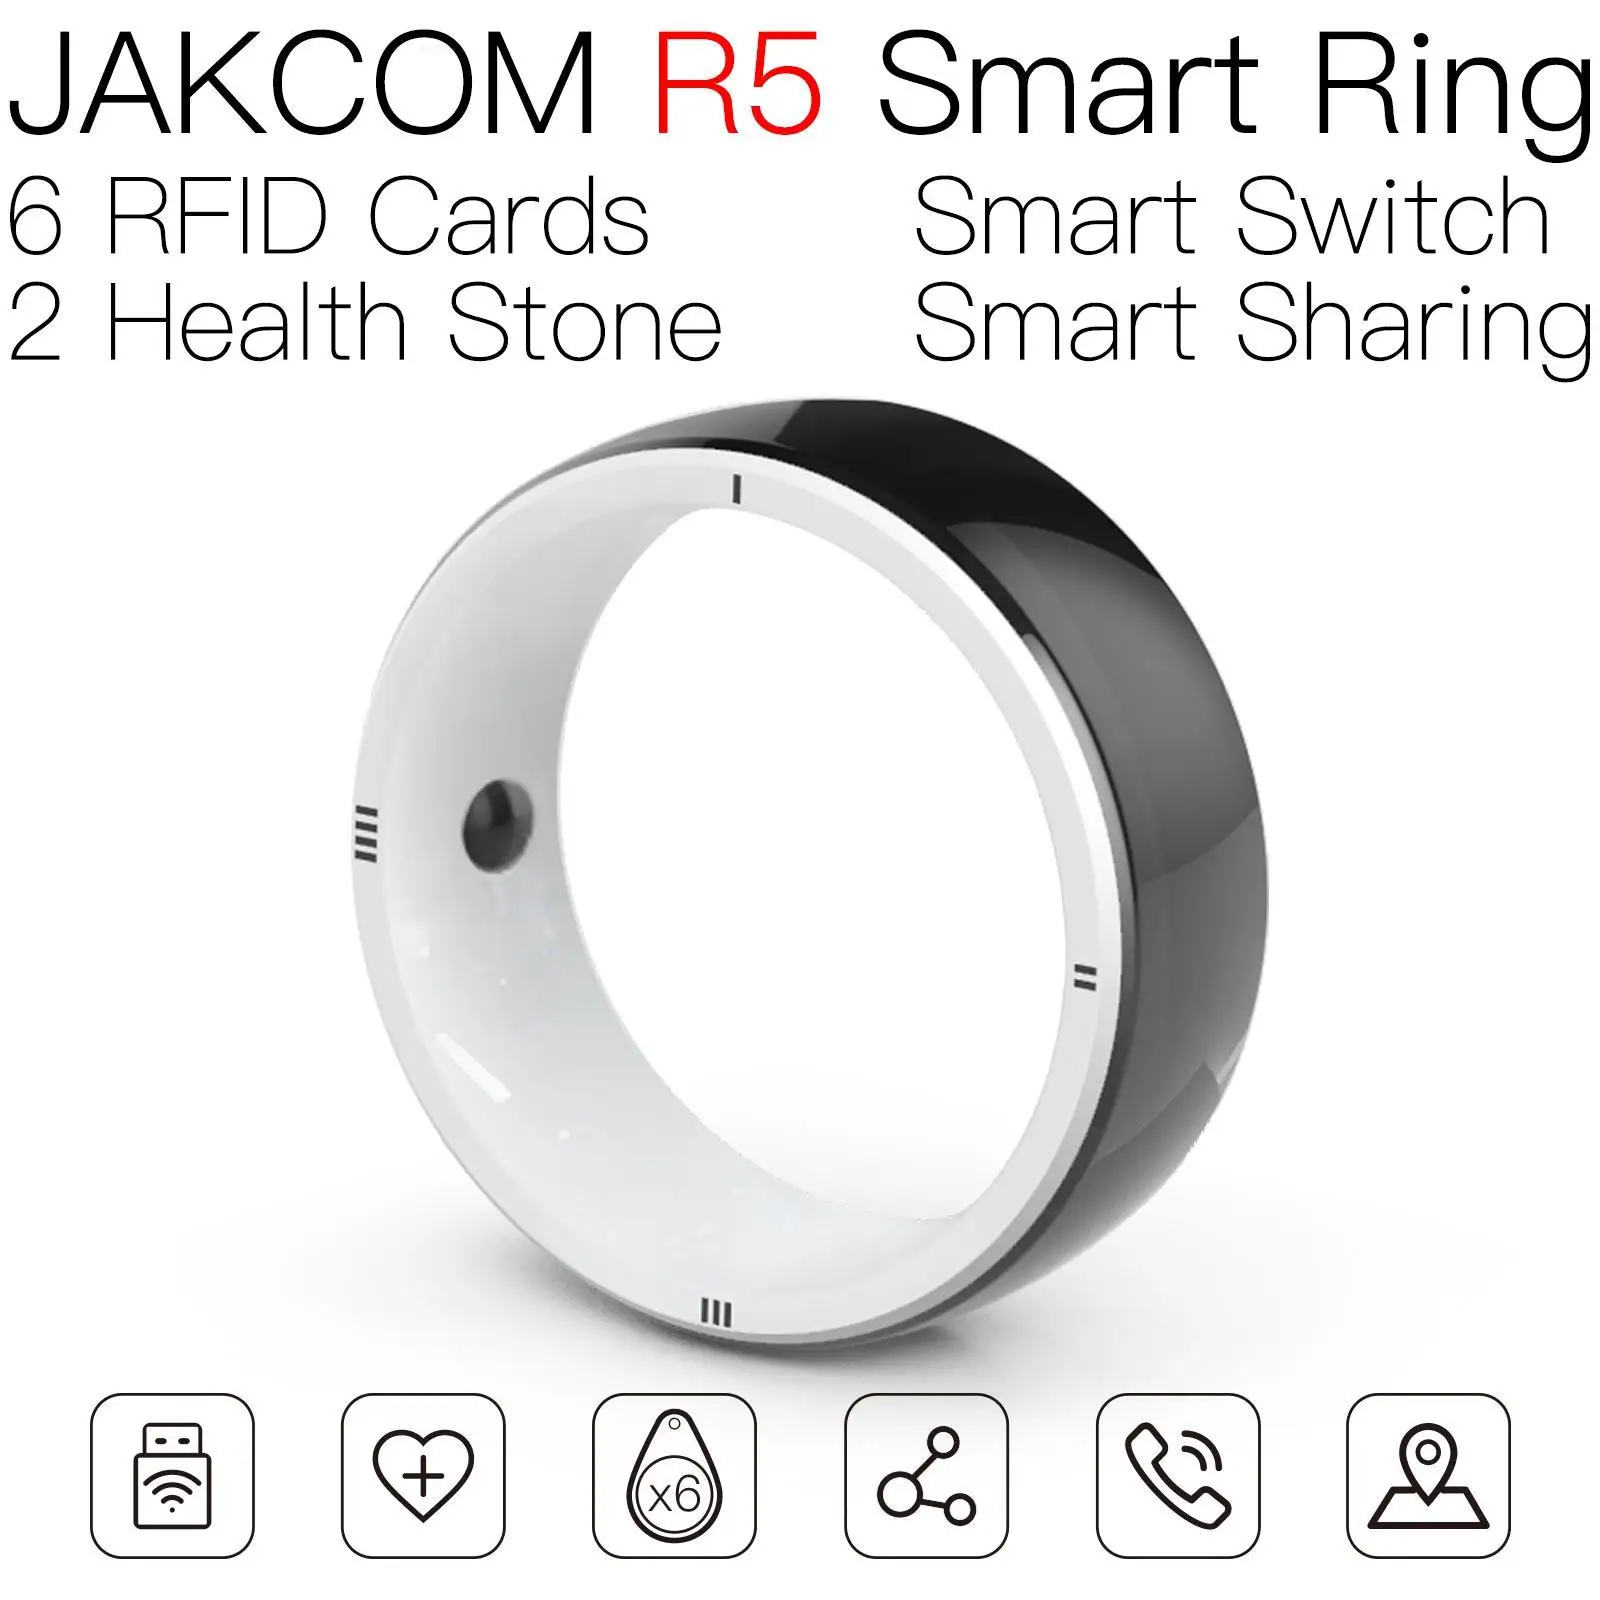 

JAKCOM R5 Smart Ring better than card blank 125 khz rewritable key tags reader cover mini switch game case access door tag